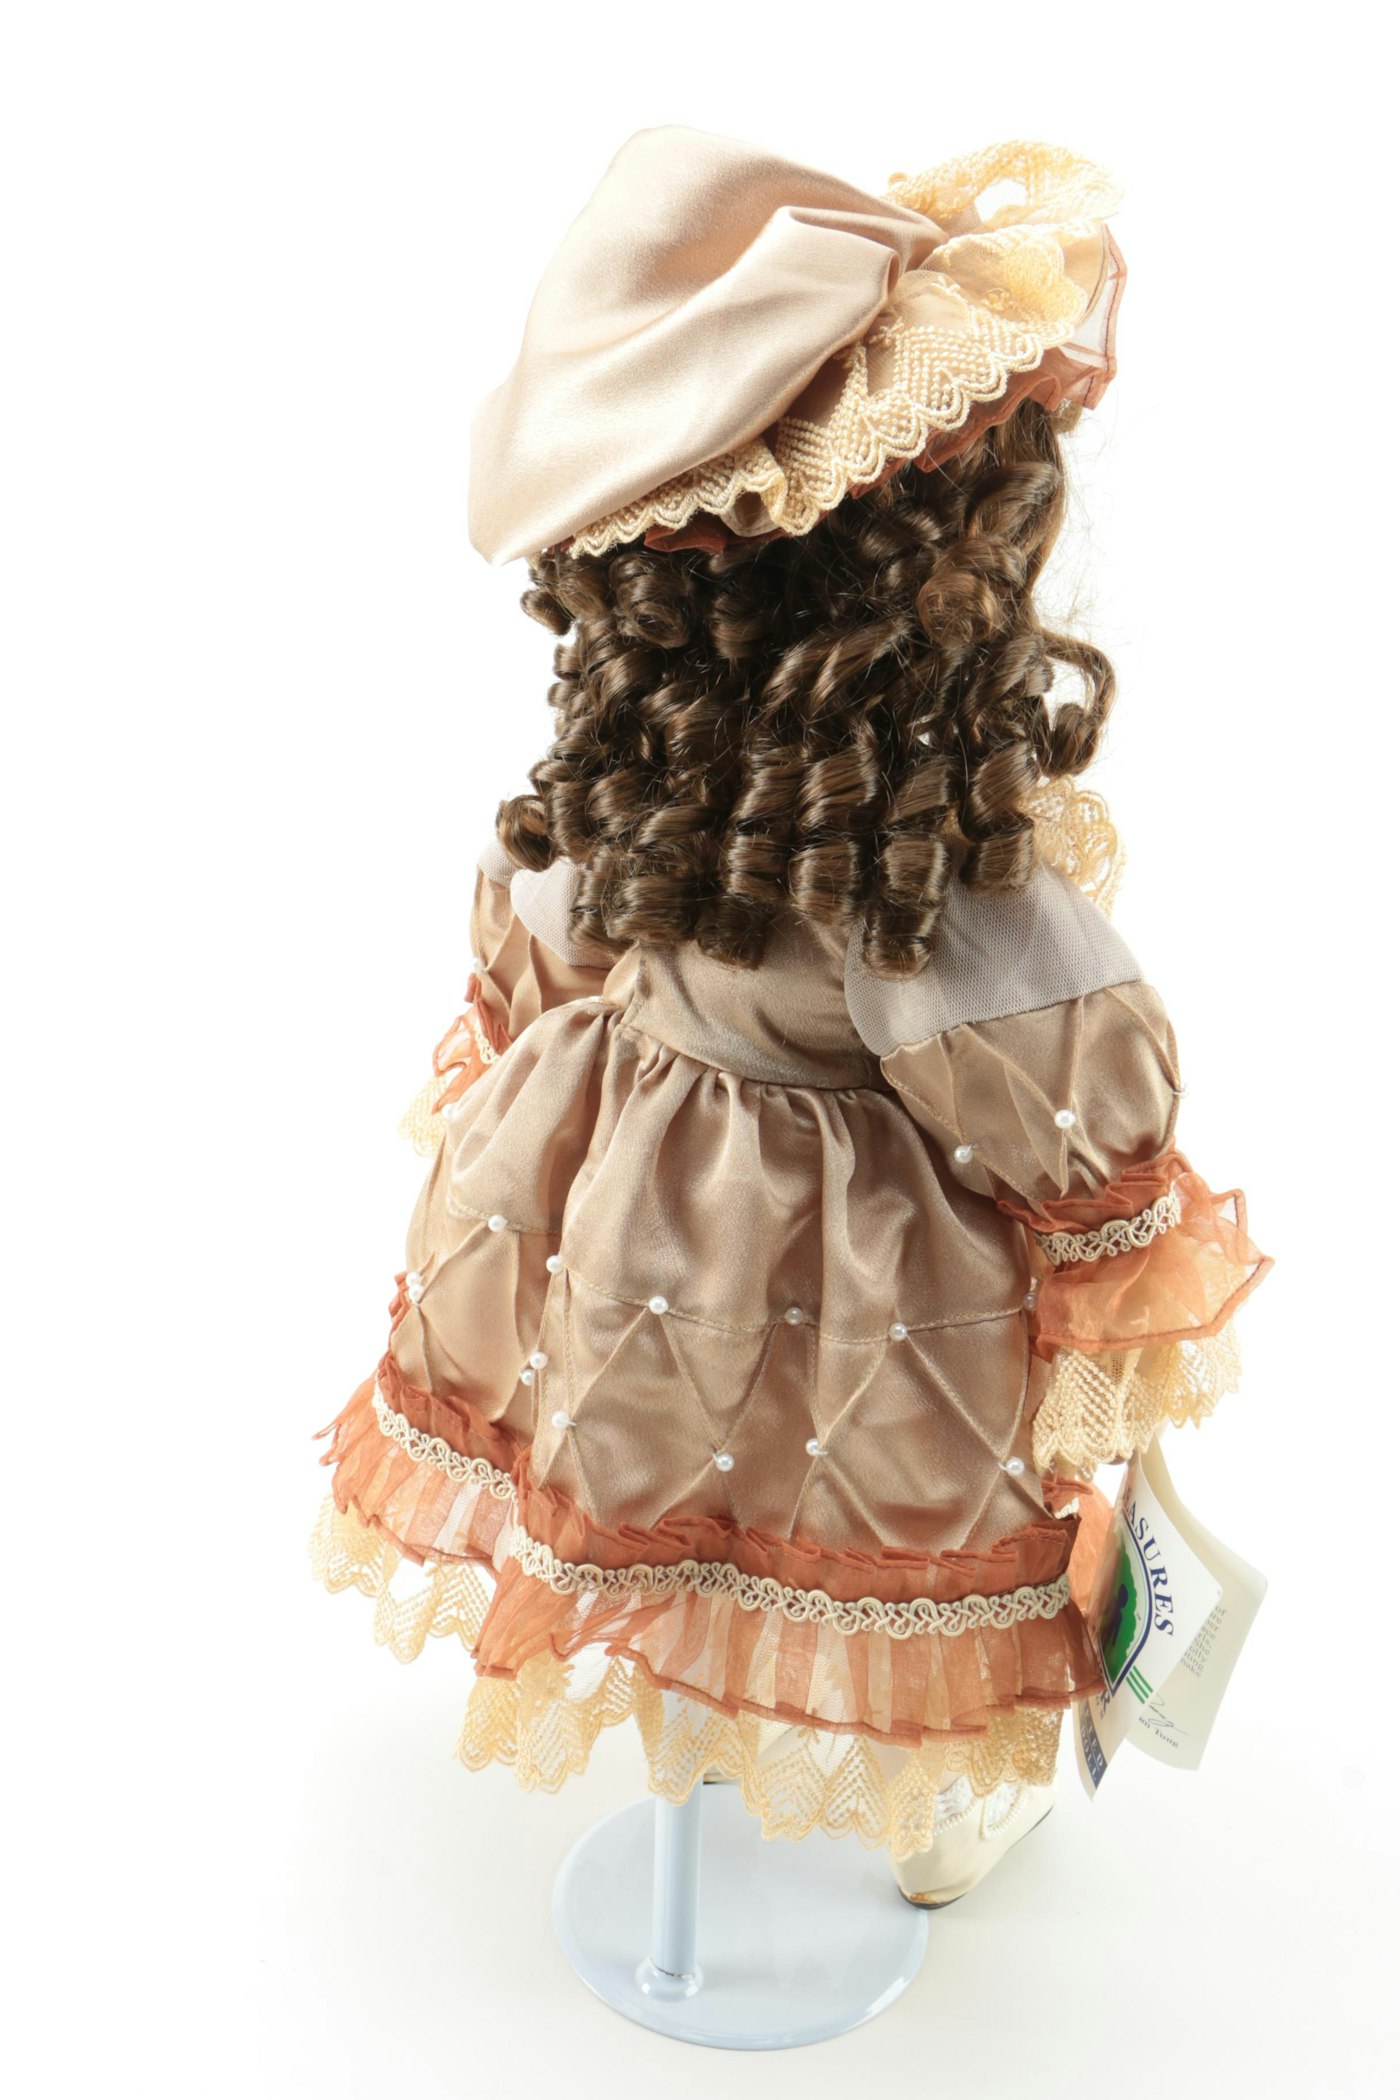 Treasures Forever Collection Hand Crafted Porcelain Doll | EBTH